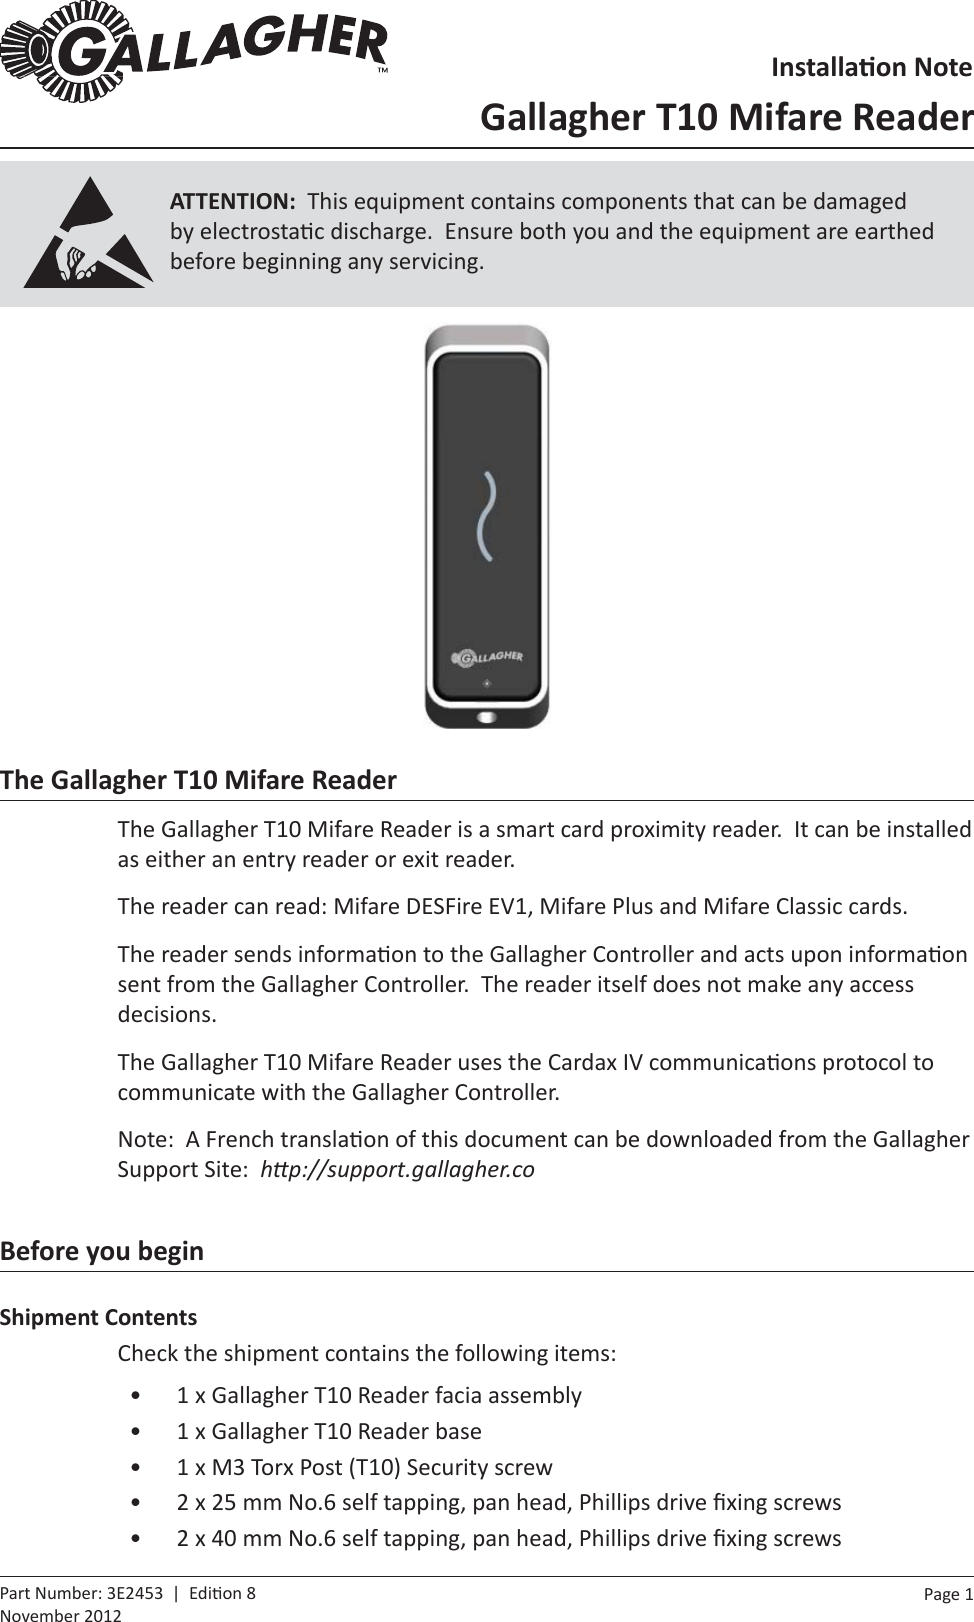 Page  1   Part Number: 3E2453  |  Edi on 8November 2012The Gallagher T10 Mifare ReaderThe Gallagher T10 Mifare Reader is a smart card proximity reader.  It can be installed as either an entry reader or exit reader.The reader can read: Mifare DESFire EV1, Mifare Plus and Mifare Classic cards.The reader sends informa on to the Gallagher Controller and acts upon informa on sent from the Gallagher Controller.  The reader itself does not make any access decisions.The Gallagher T10 Mifare Reader uses the Cardax IV communica ons protocol to communicate with the Gallagher Controller.Note:  A French transla on of this document can be downloaded from the Gallagher Support Site:  hƩ p://support.gallagher.coBefore you beginShipment ContentsCheck the shipment contains the following items:•  1 x Gallagher T10 Reader facia assembly•  1 x Gallagher T10 Reader base•  1 x M3 Torx Post (T10) Security screw•  2 x 25 mm No.6 self tapping, pan head, Phillips drive ﬁ xing screws•  2 x 40 mm No.6 self tapping, pan head, Phillips drive ﬁ xing screwsInstallaƟ on NoteGallagher T10 Mifare ReaderATTENTION:  This equipment contains components that can be damaged by electrosta c discharge.  Ensure both you and the equipment are earthed before beginning any servicing.